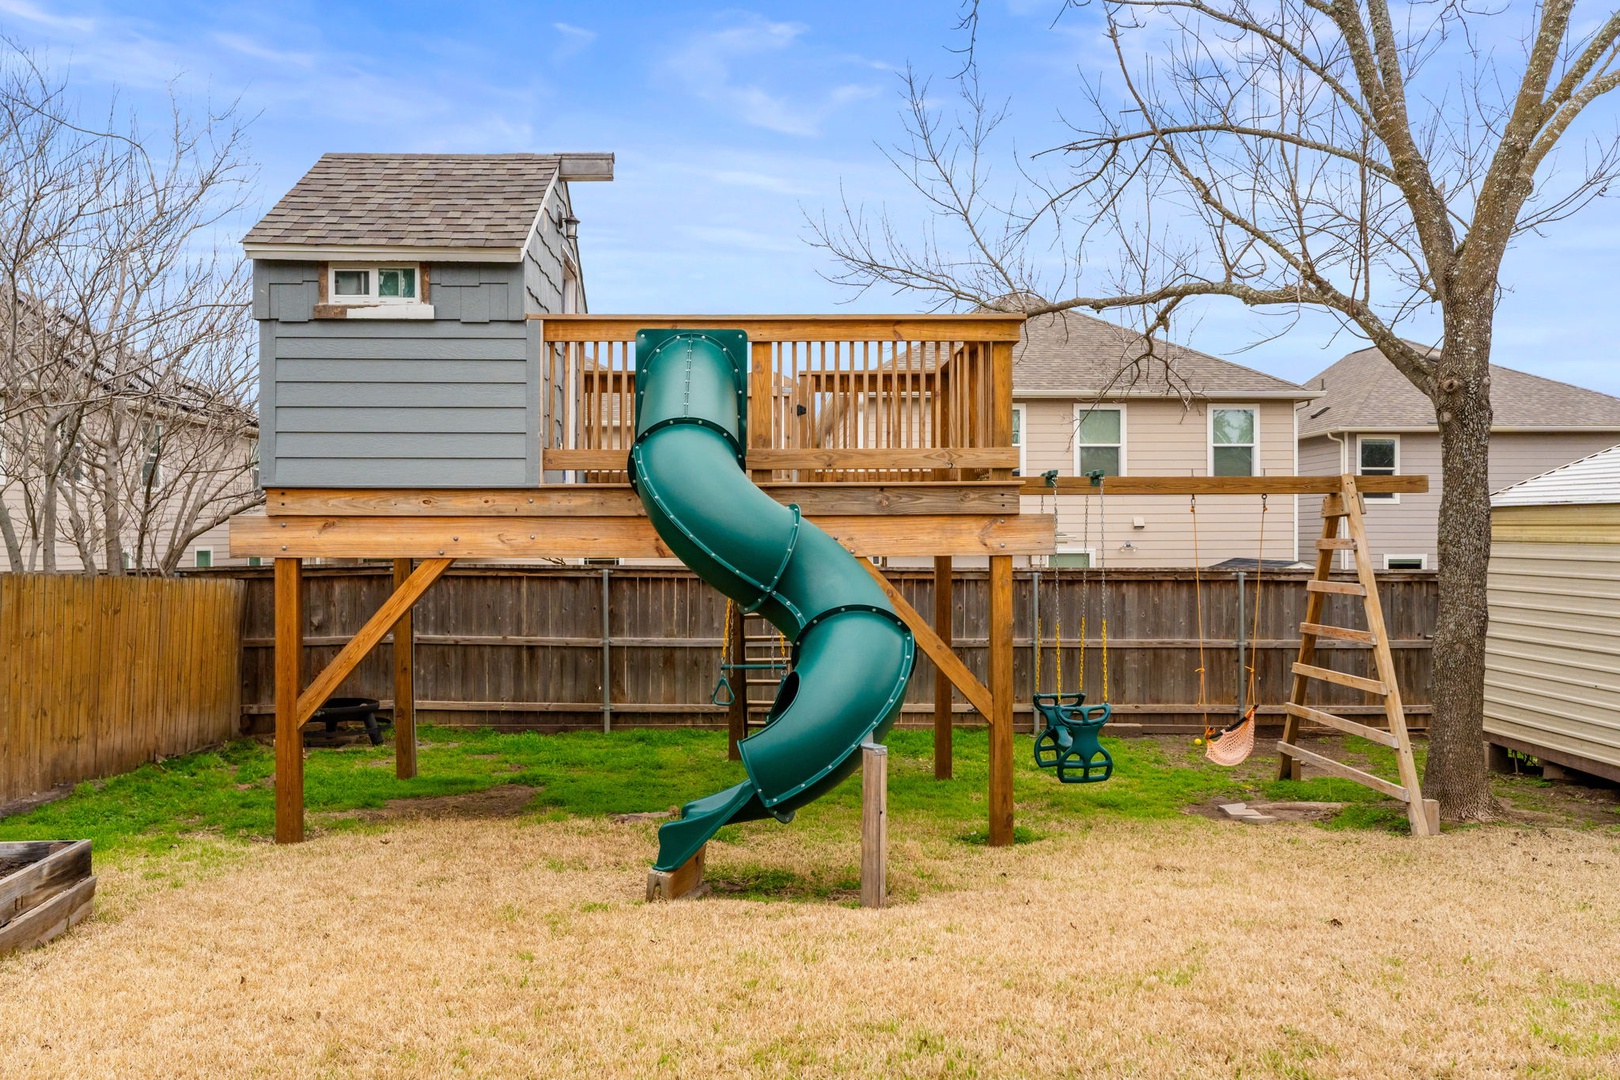 The backyard playground equipment/clubhouse is sure to be a hit with littles!